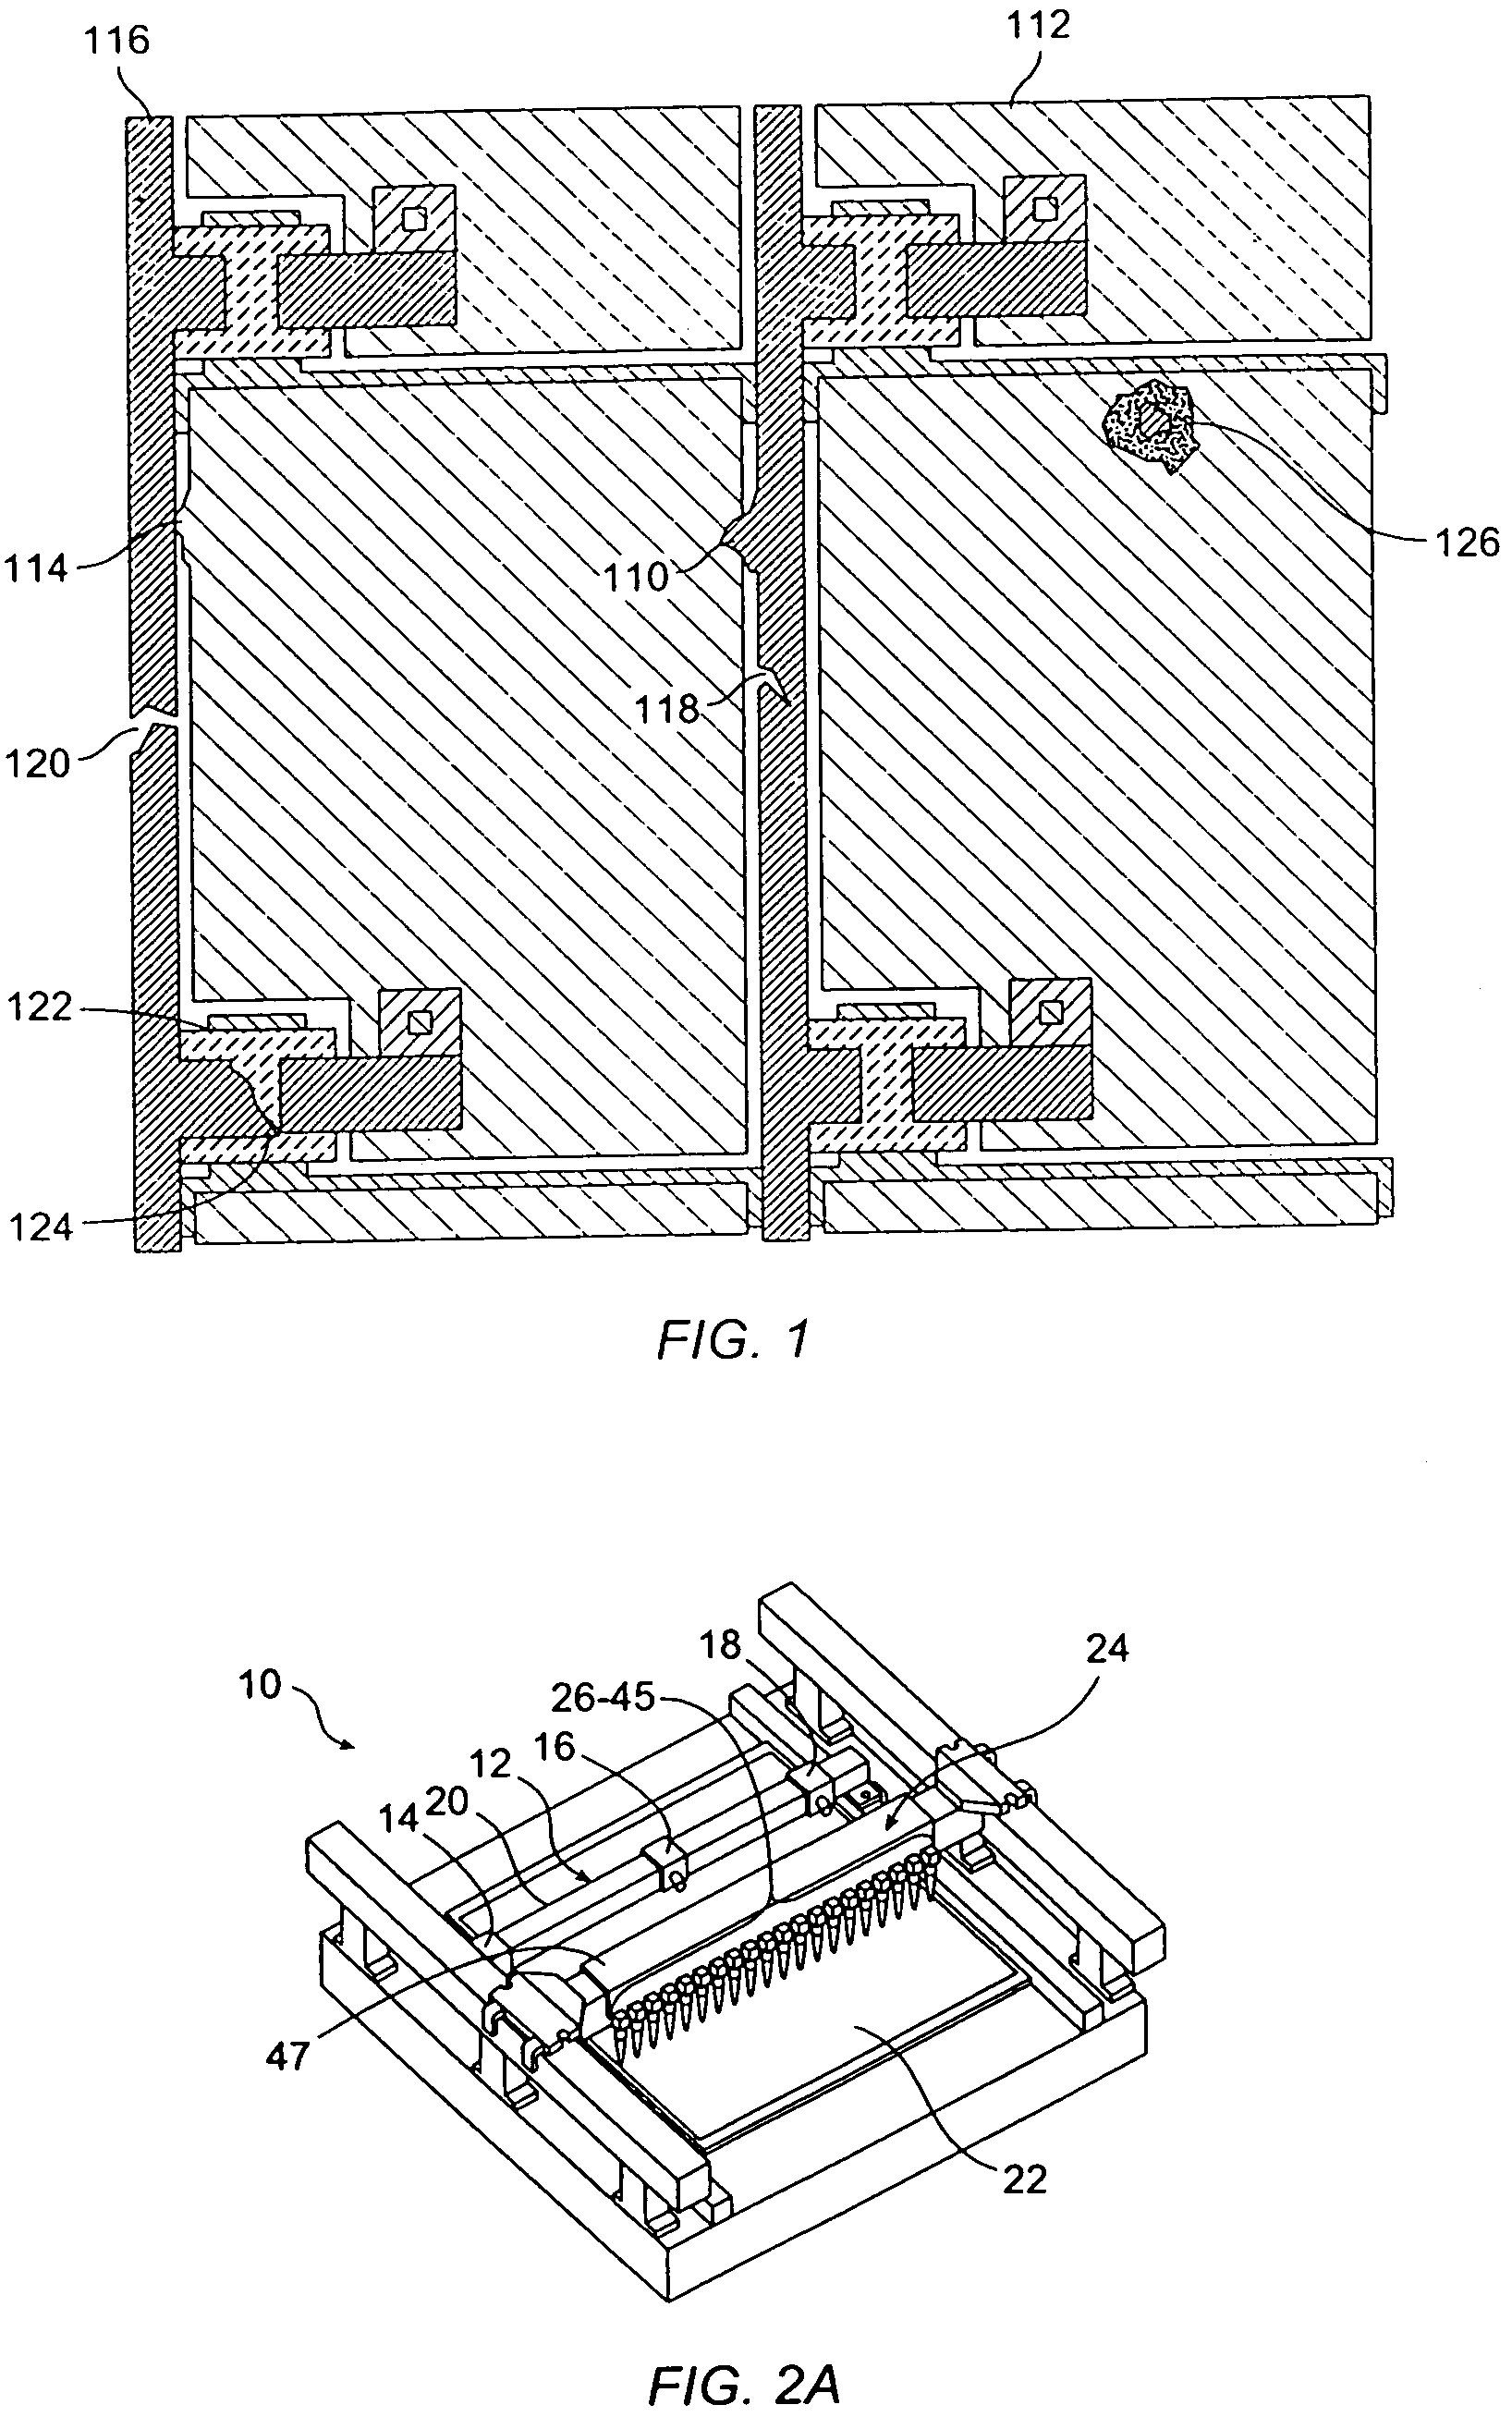 Method and apparatus for flat patterned media inspection